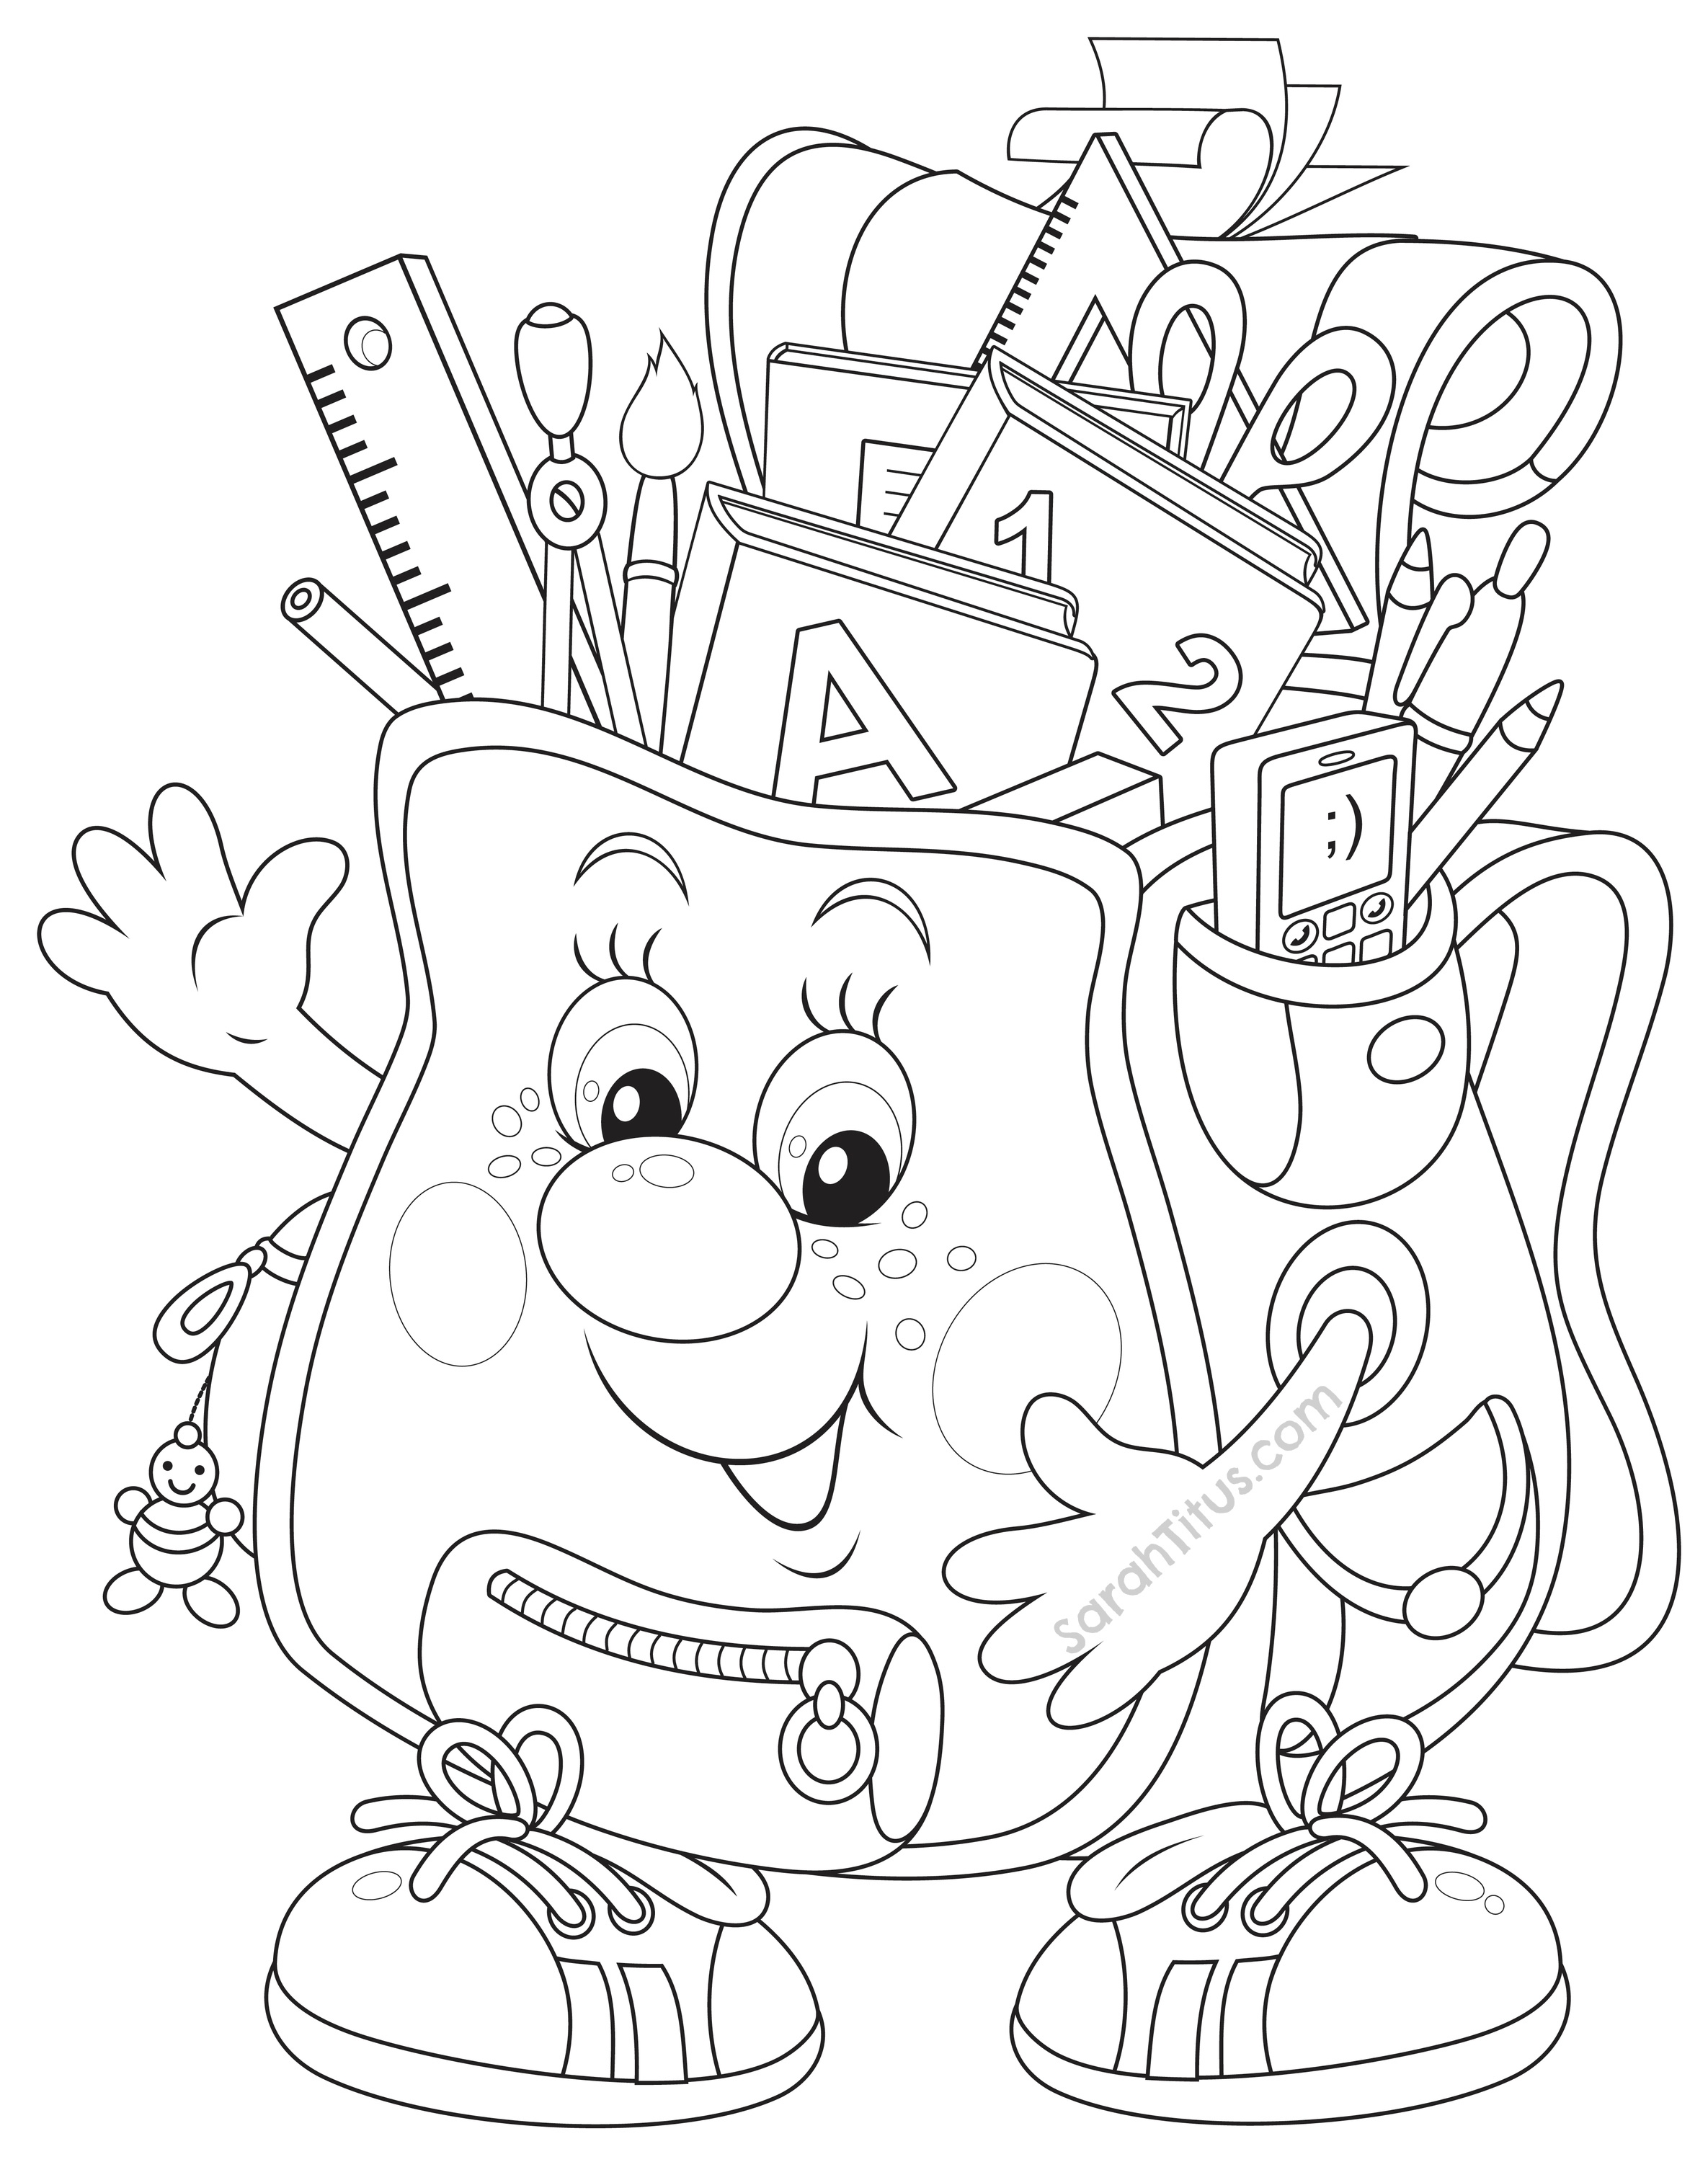 End Of Year Coloring Pages At GetColorings Free Printable Colorings Pages To Print And Color